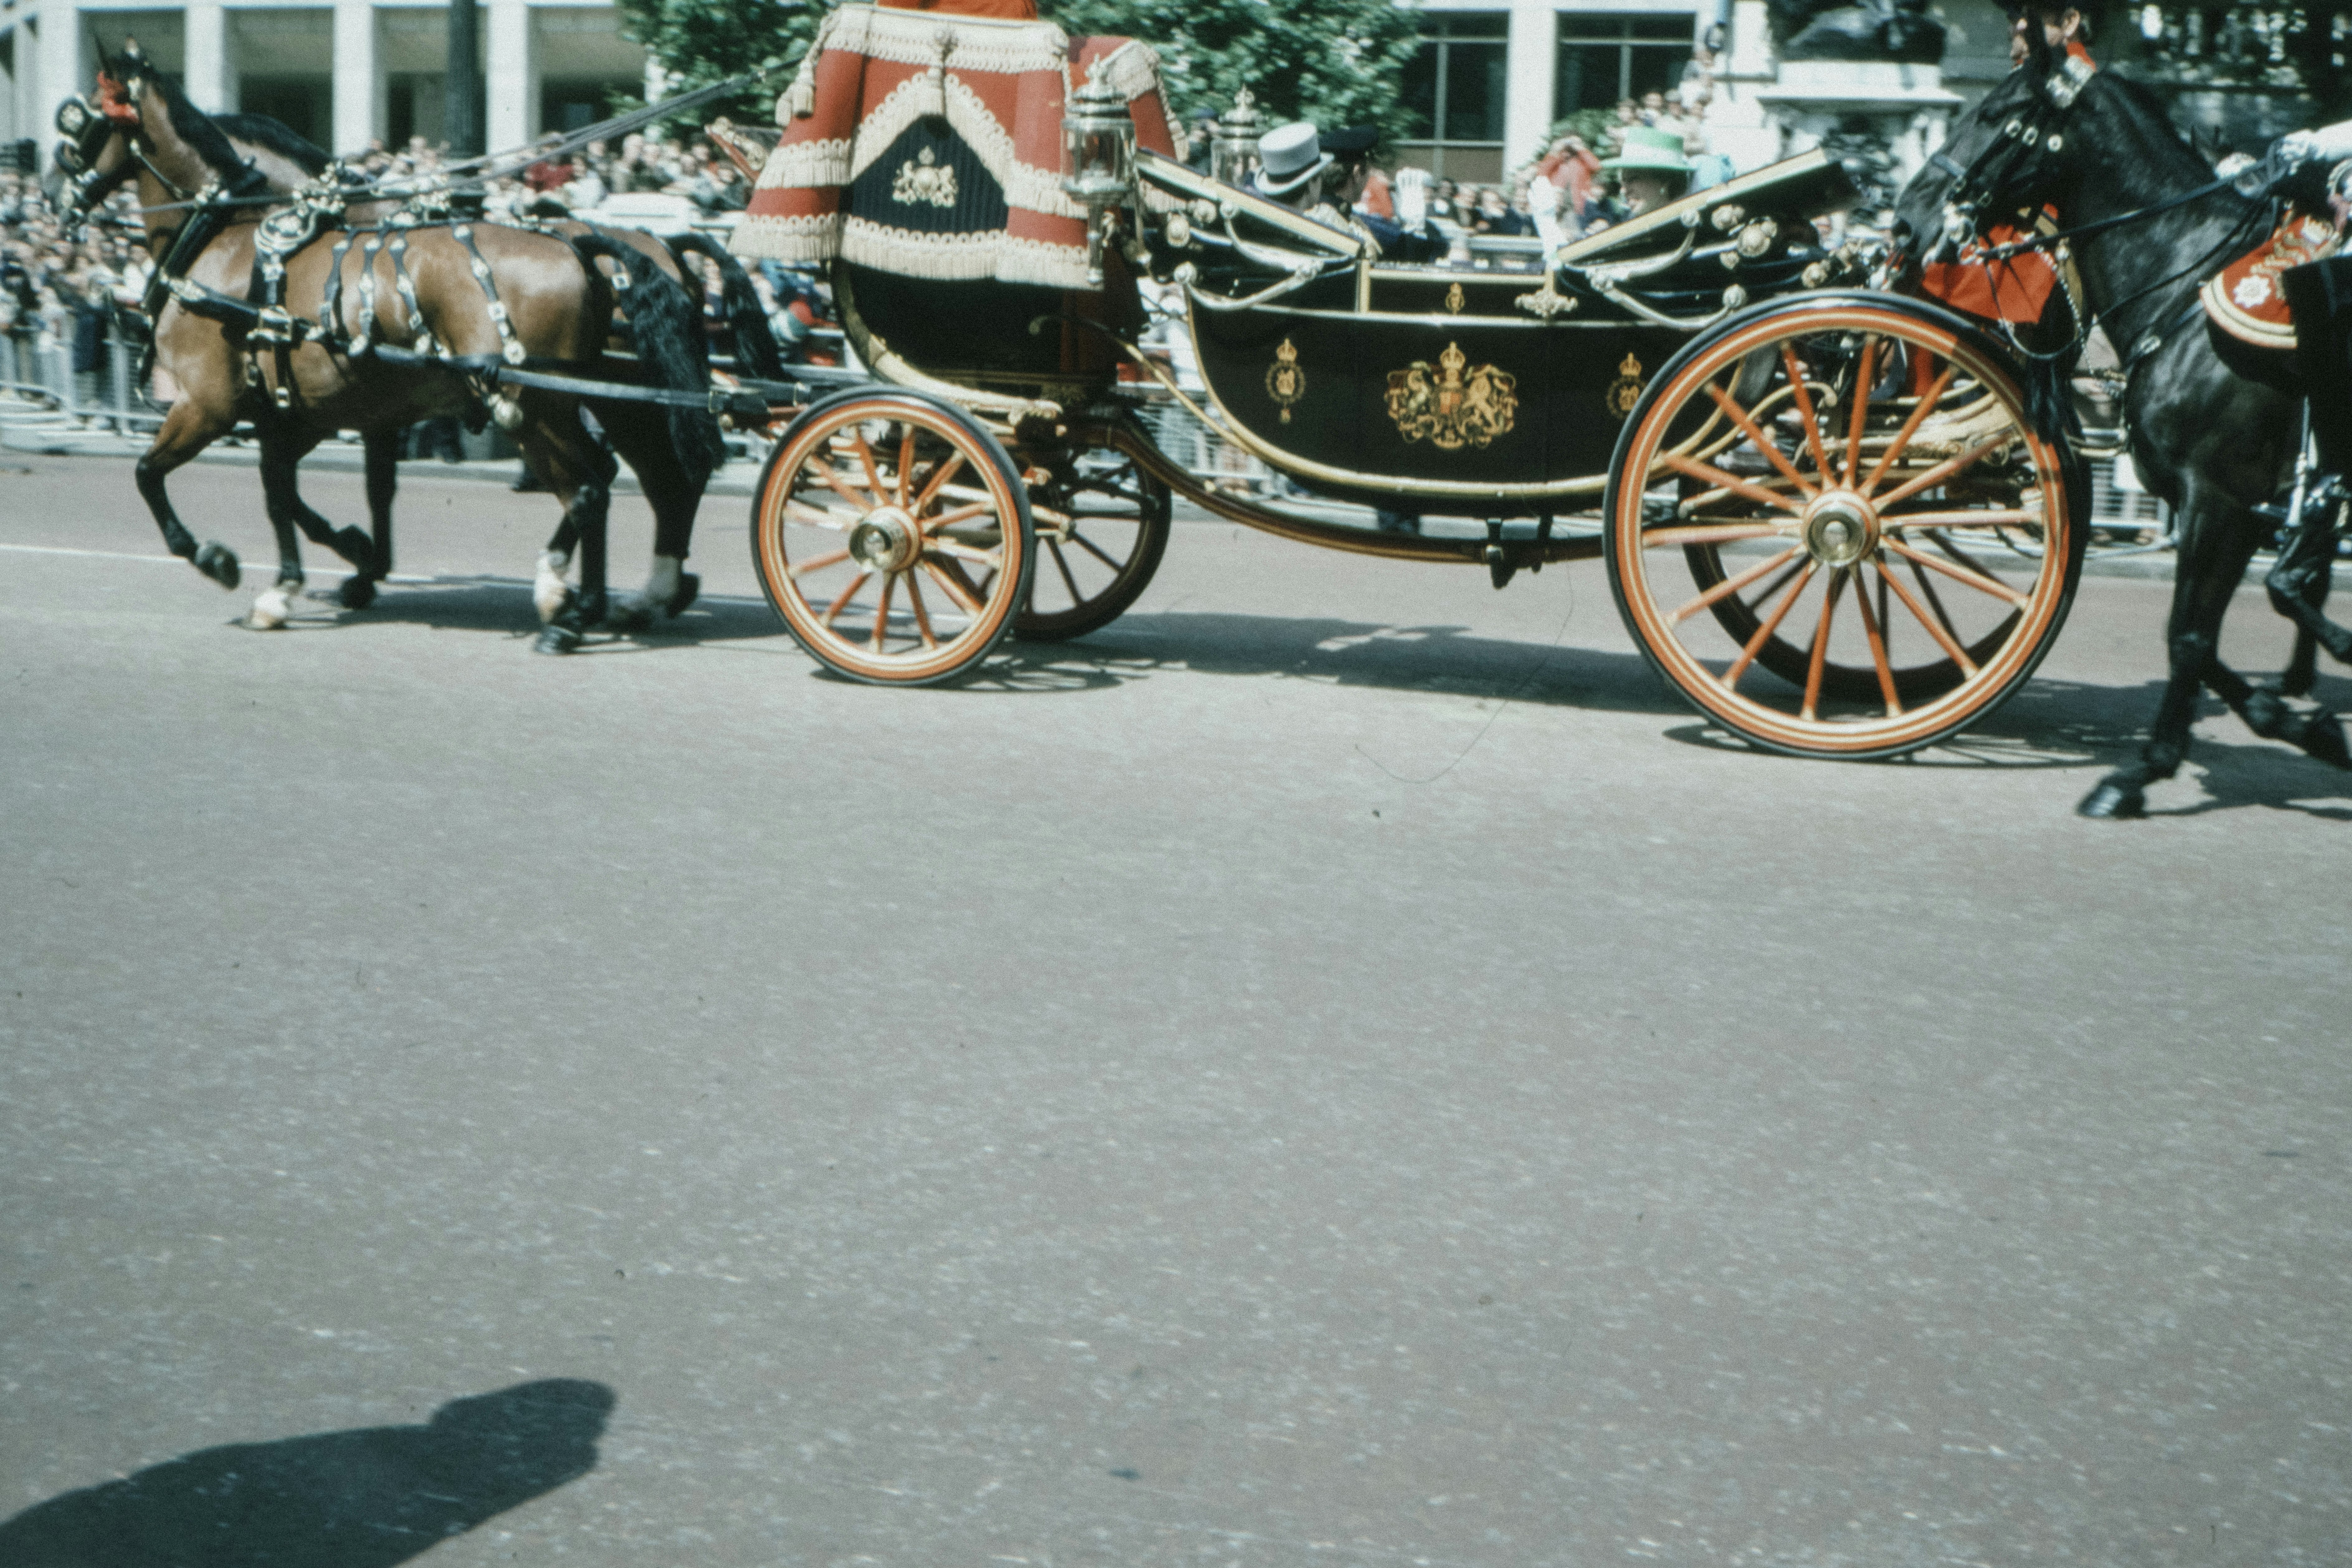 black horse with red and black carriage on road during daytime